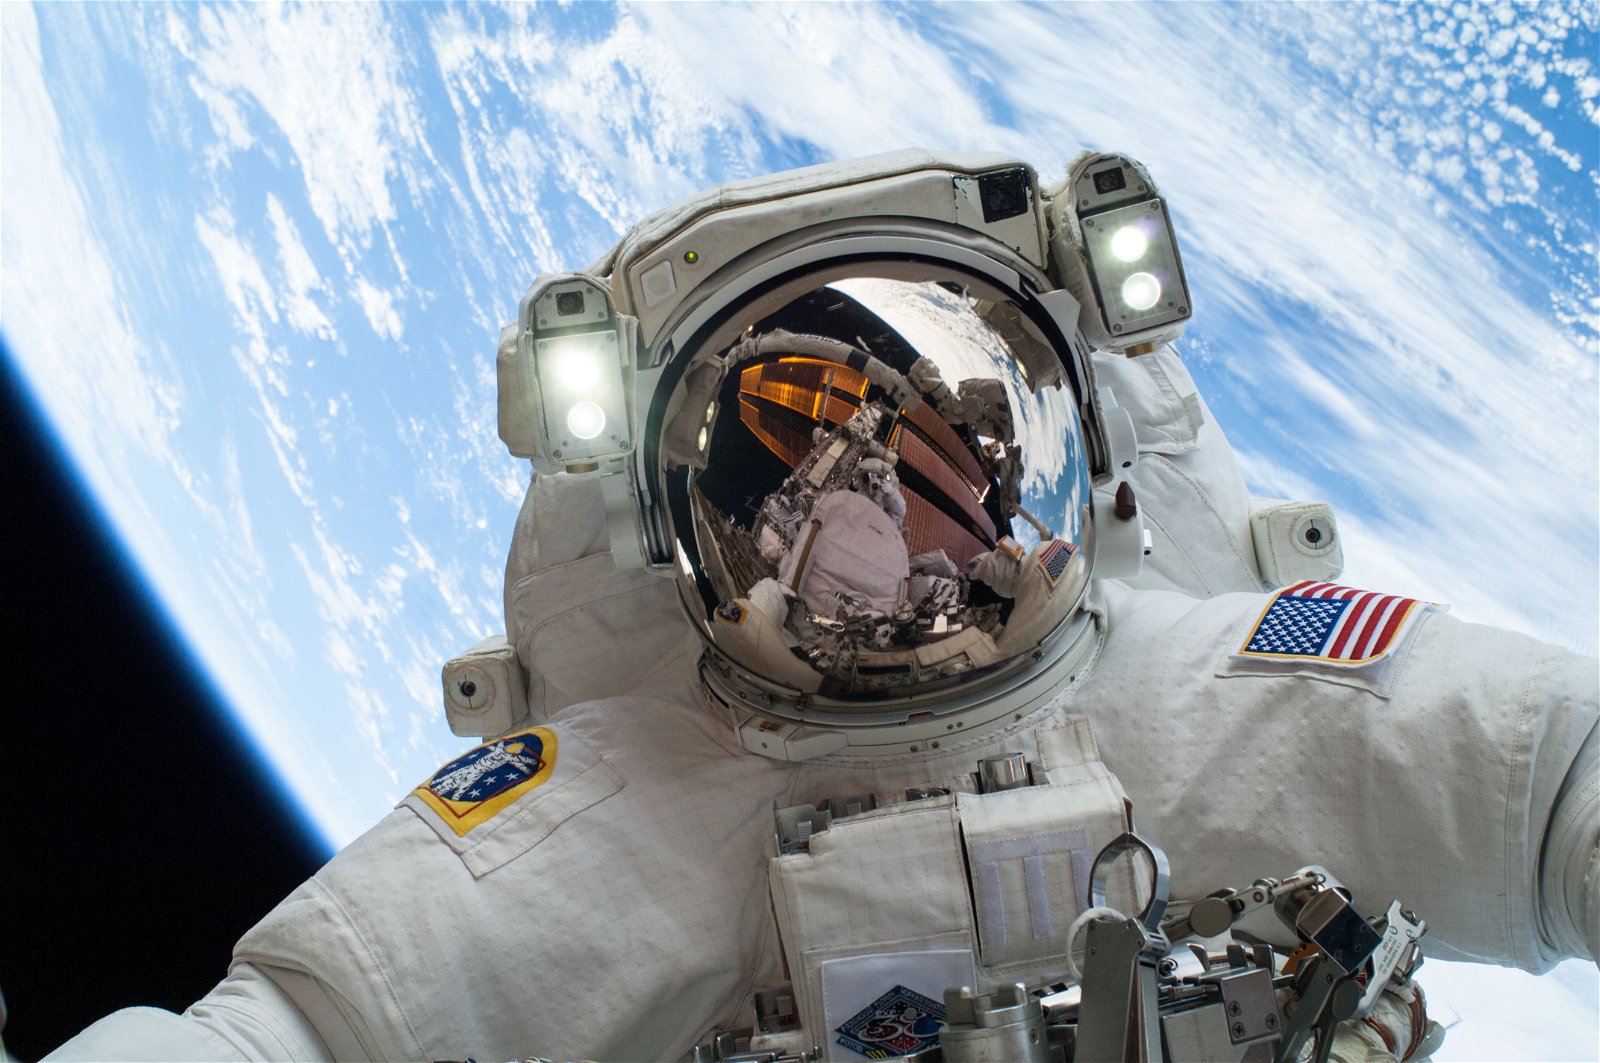 “Selfie” picture of NASA astronaut at the ISS